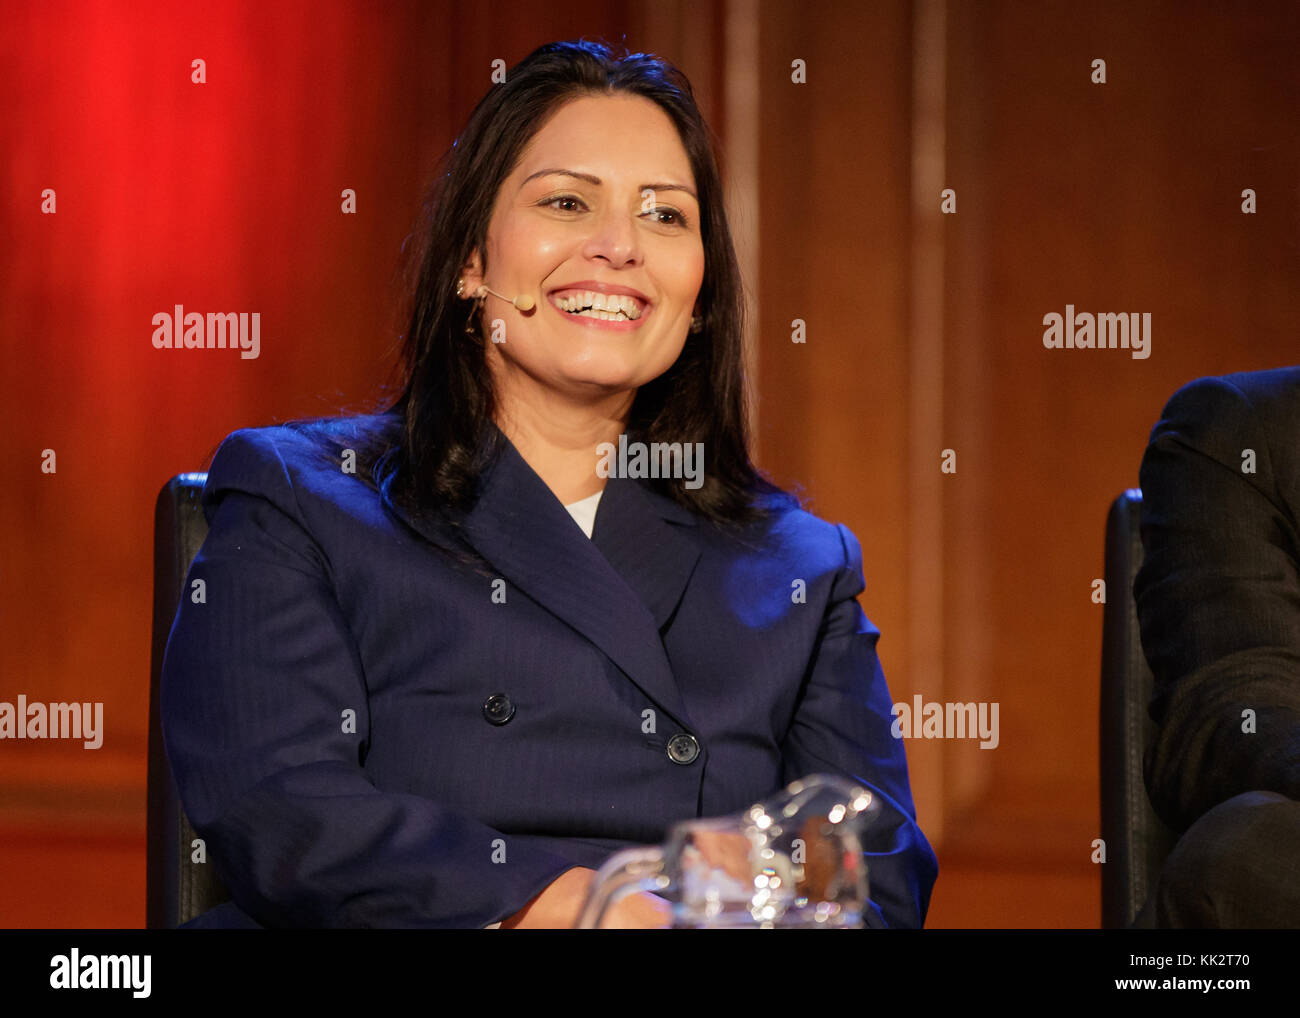 London, UK. 27th Nov, 2017. Priti Patel MP during a panel discussion for The Spectator Magazine at the Emmanuel Centre, London Credit: Ben Queenborough/Alamy Live News Stock Photo